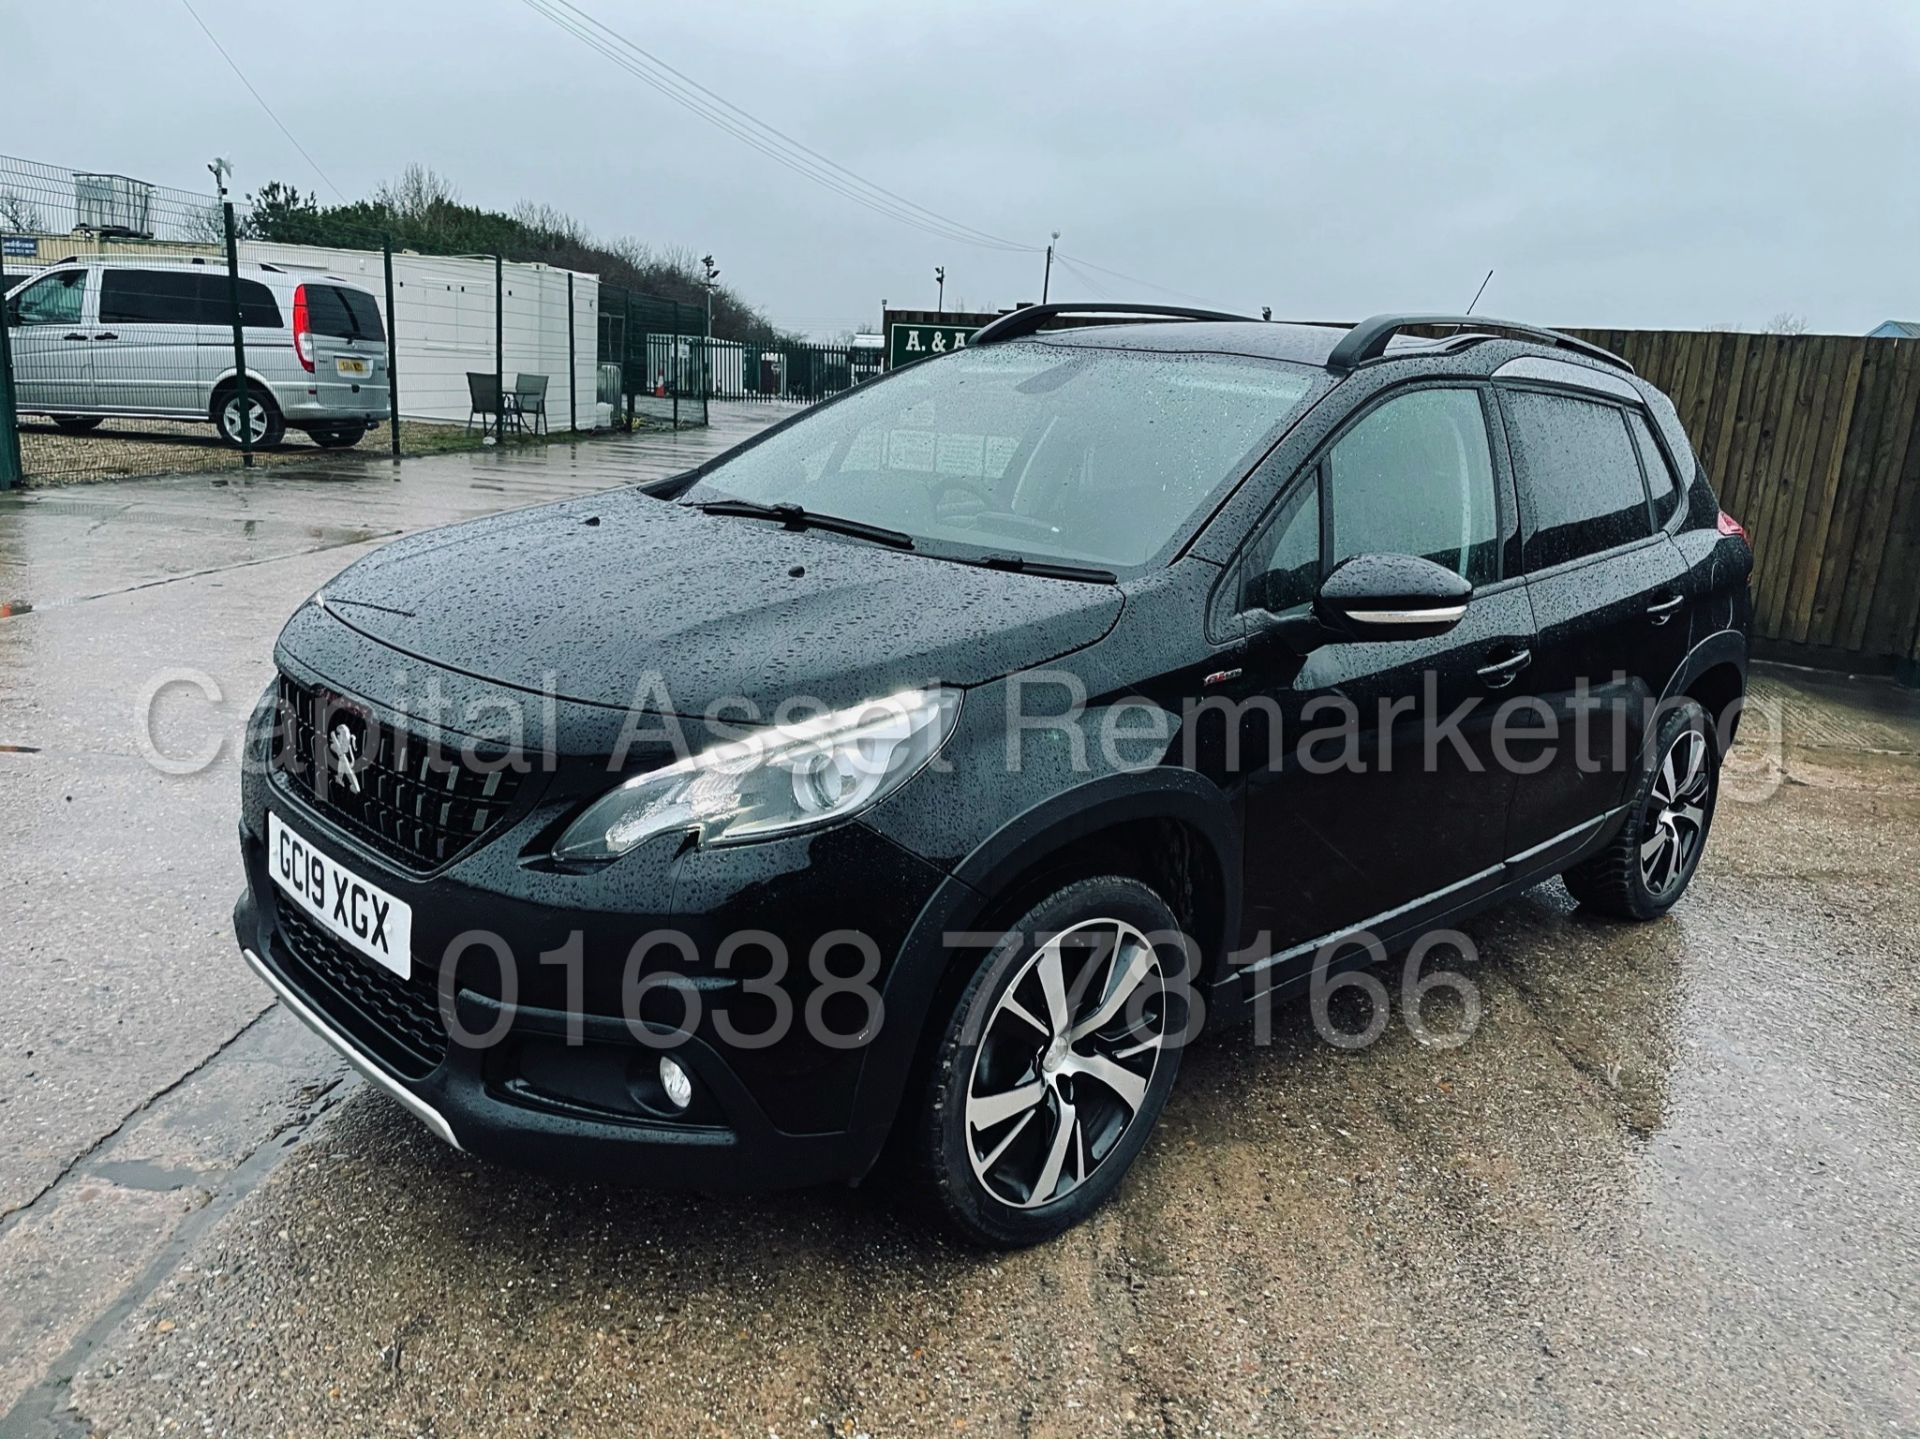 PEUGEOT 2008 *GT LINE* SUV / MPV (2019 - EURO 6) '1.5 BLUE HDI' *SAT NAV - PAN ROOF' *LOW MILES* - Image 5 of 46